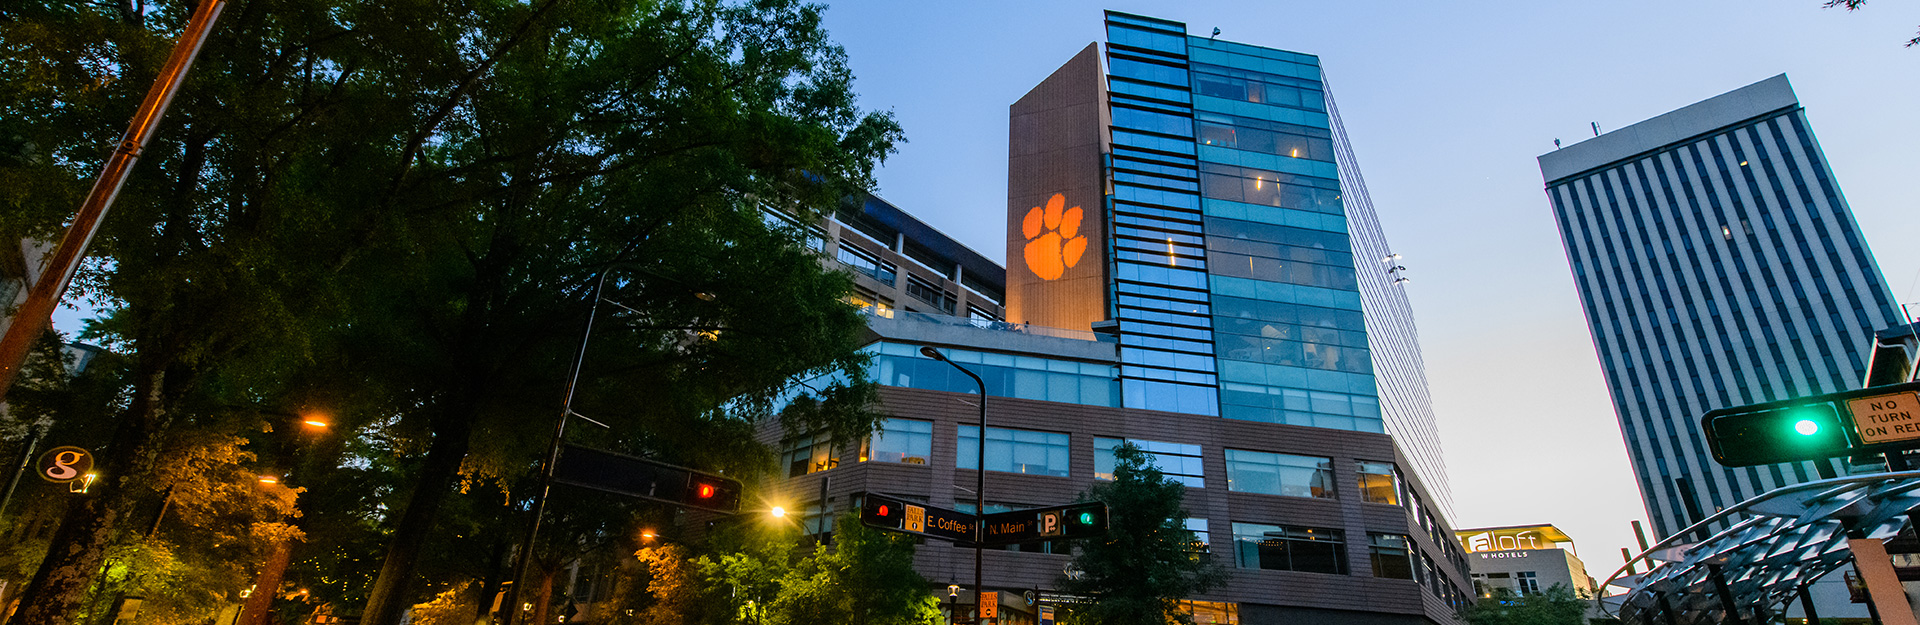 Outside view of Greenville ONE building with Tiger Paw projection.